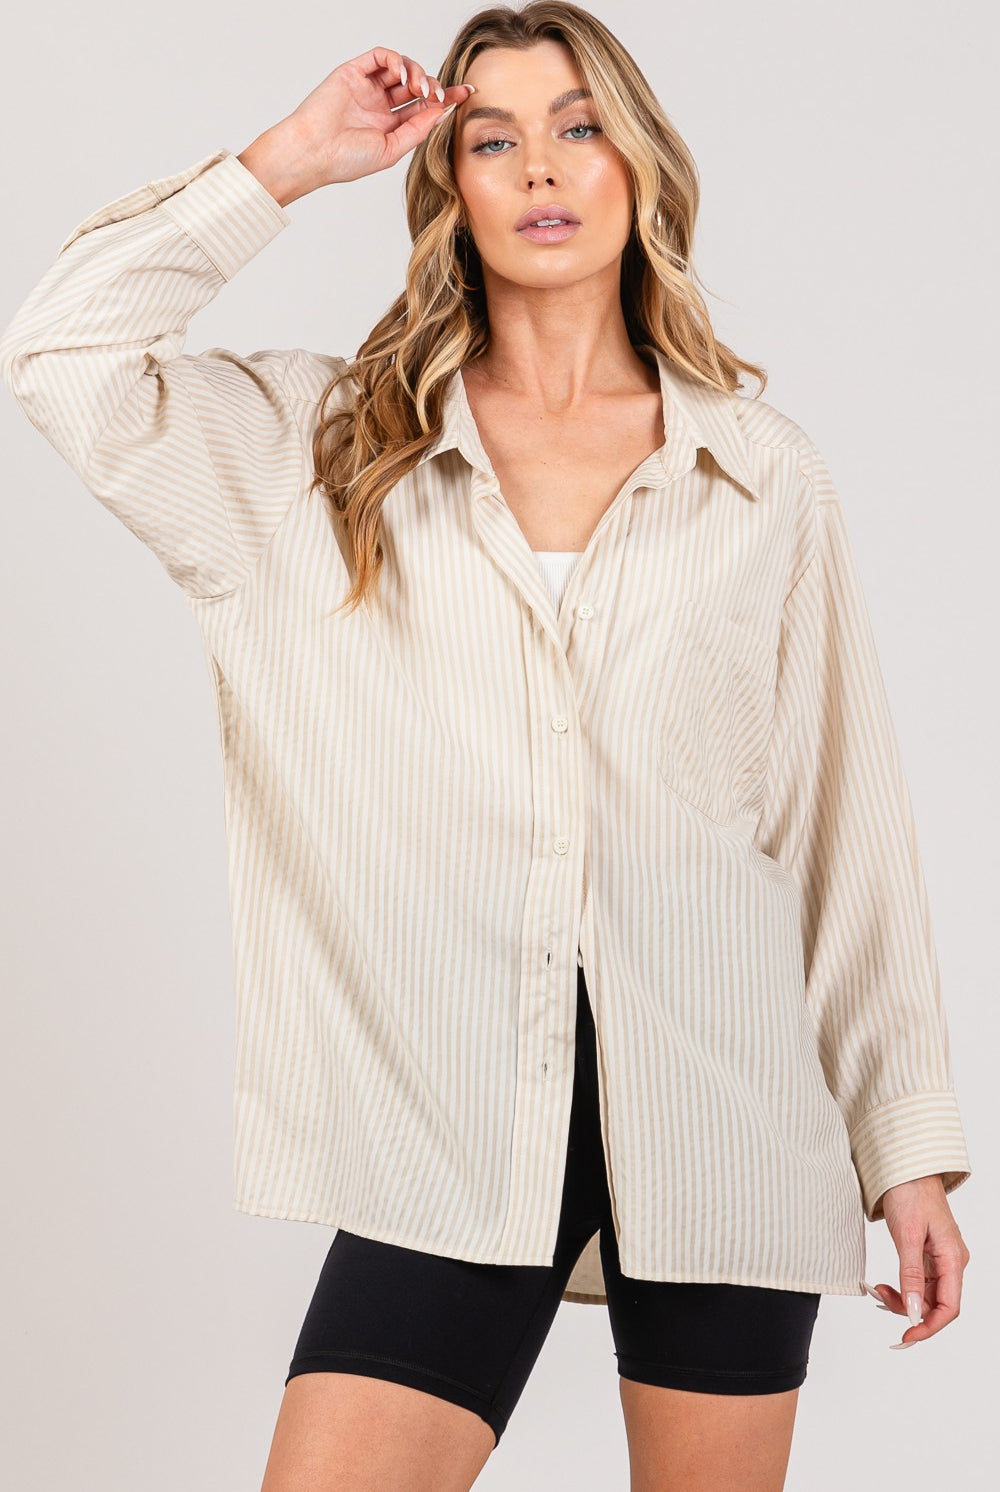 A woman is showcasing a chic beige striped long sleeve shirt with a casual open front design, layered over a white crop top, and paired with black biker shorts. The shirt features a classic collar, a chest pocket, and buttoned cuffs, highlighting a versatile and trendy piece from GemThreads Boutique.